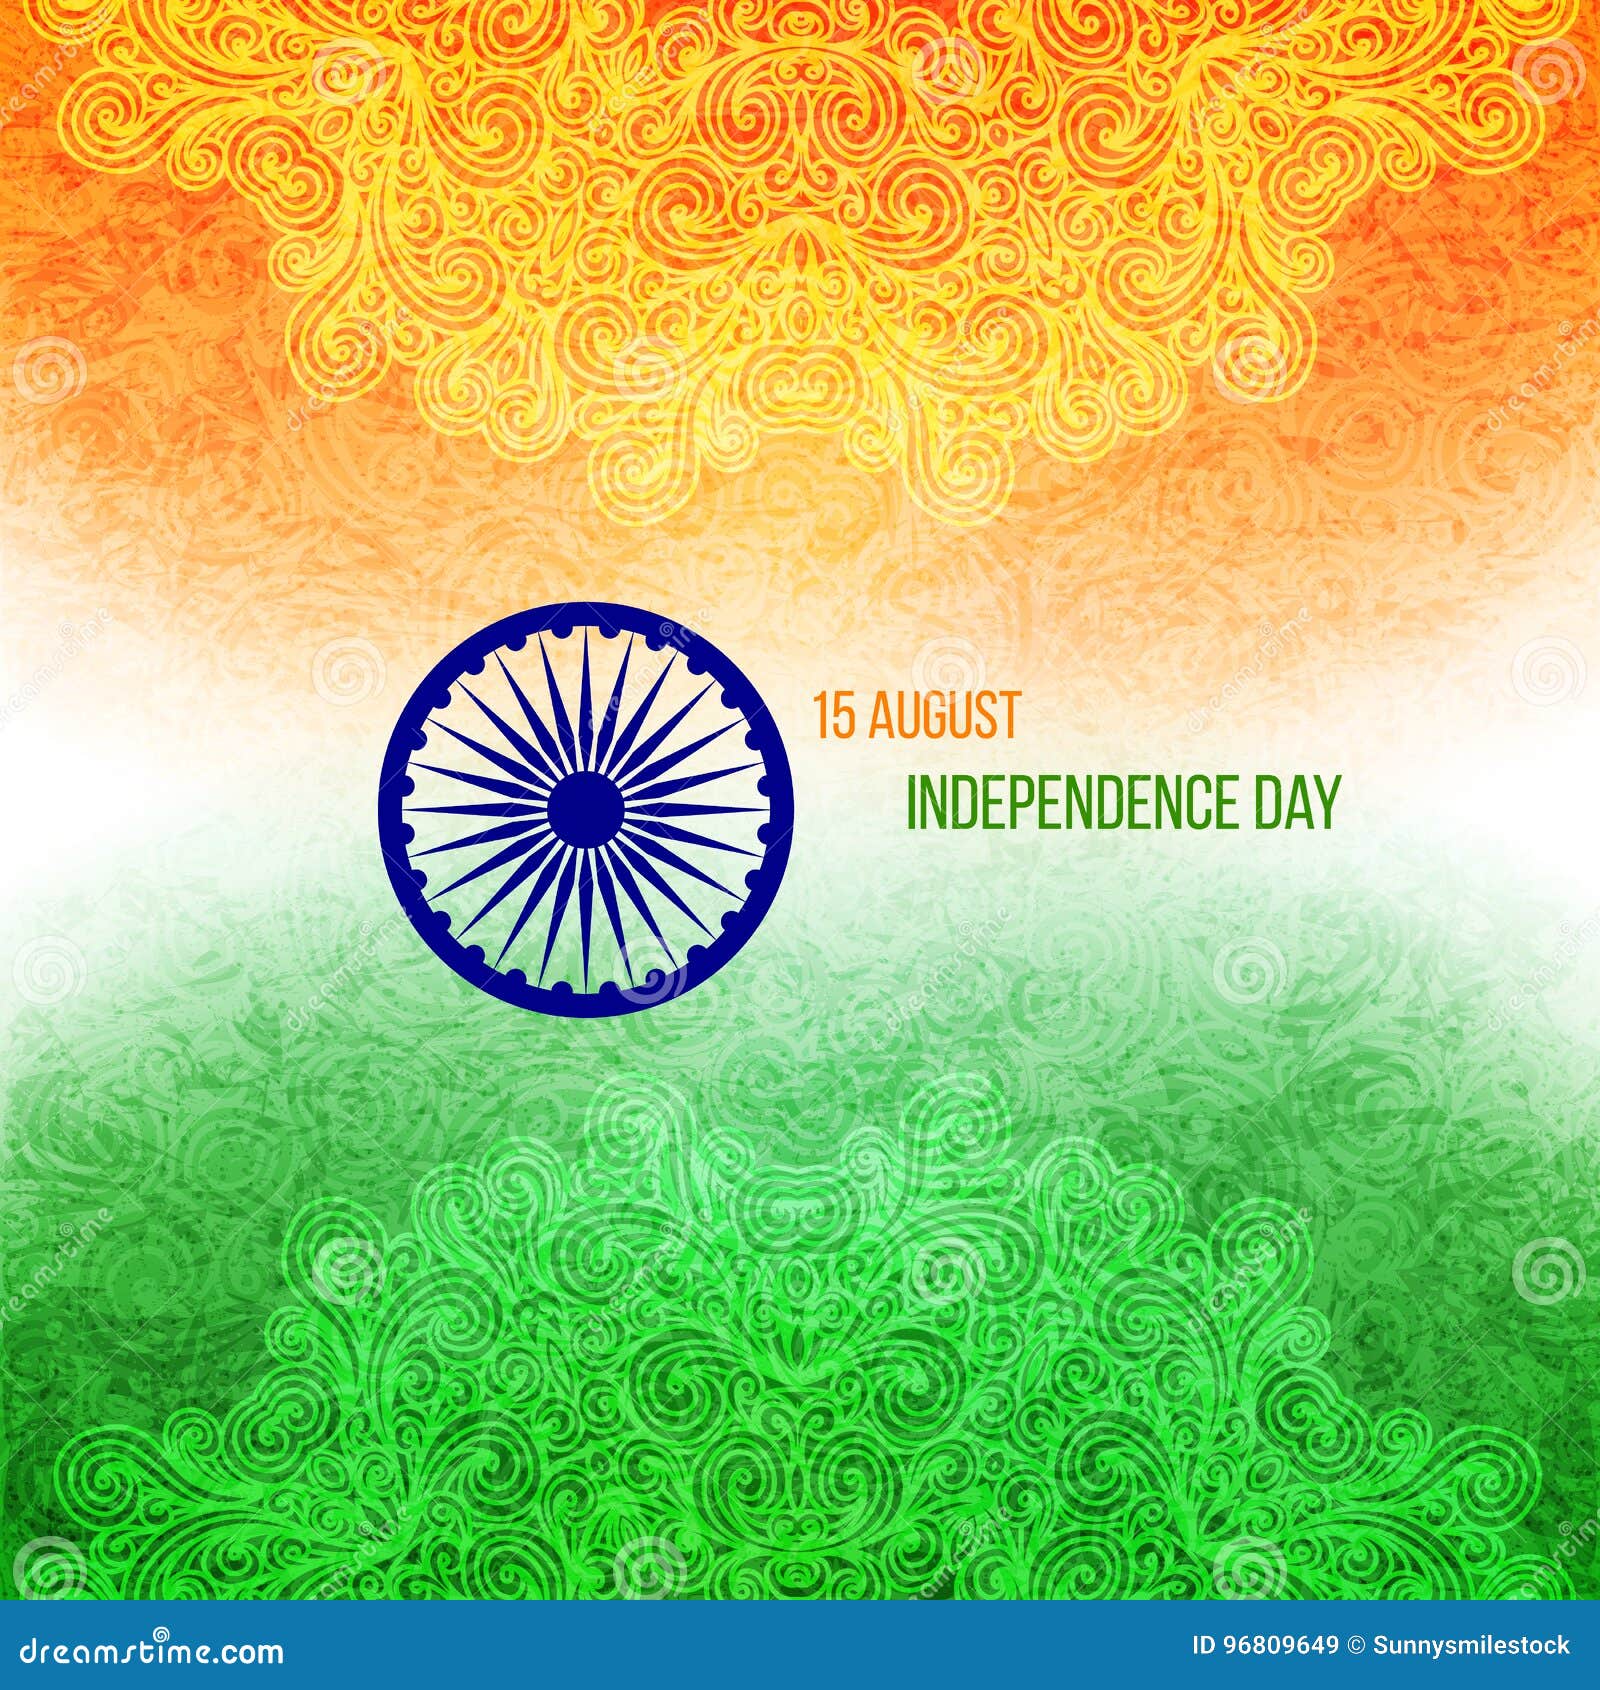 Indian Independence Day stock vector. Illustration of celebration ...